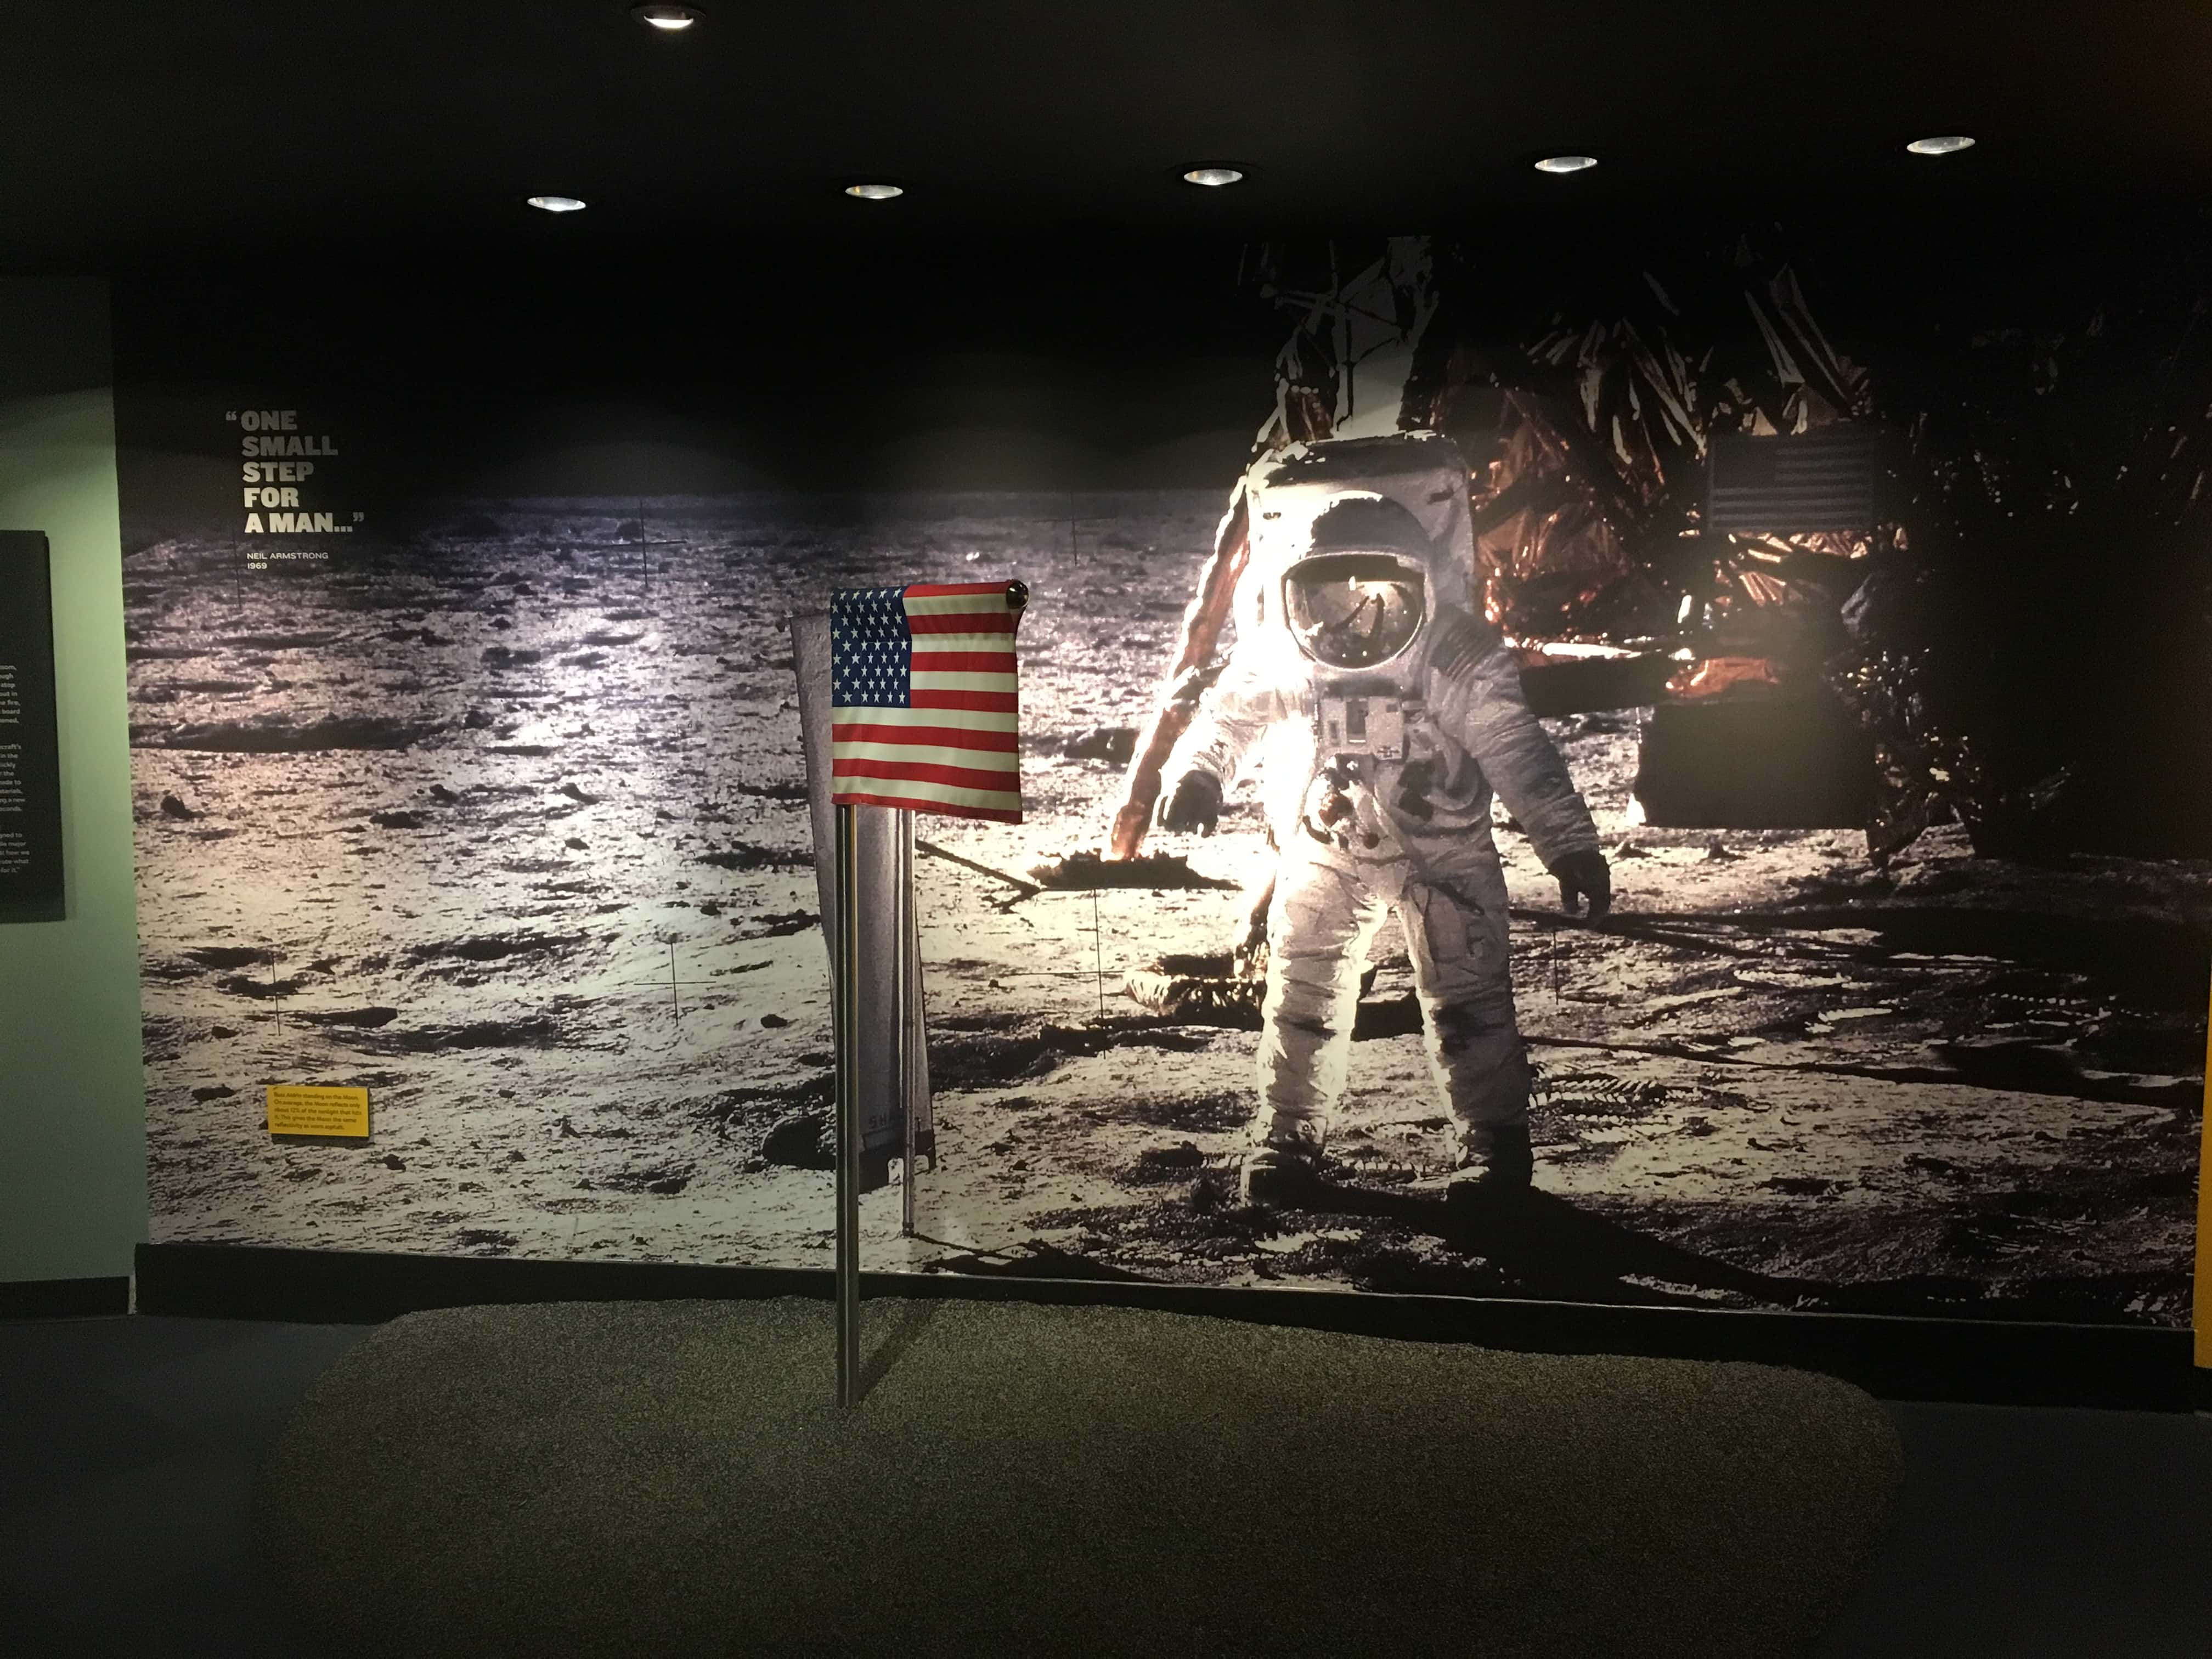 "Houston, we've had a problem." at Mission Moon at the Adler Planetarium in Chicago, Illinois